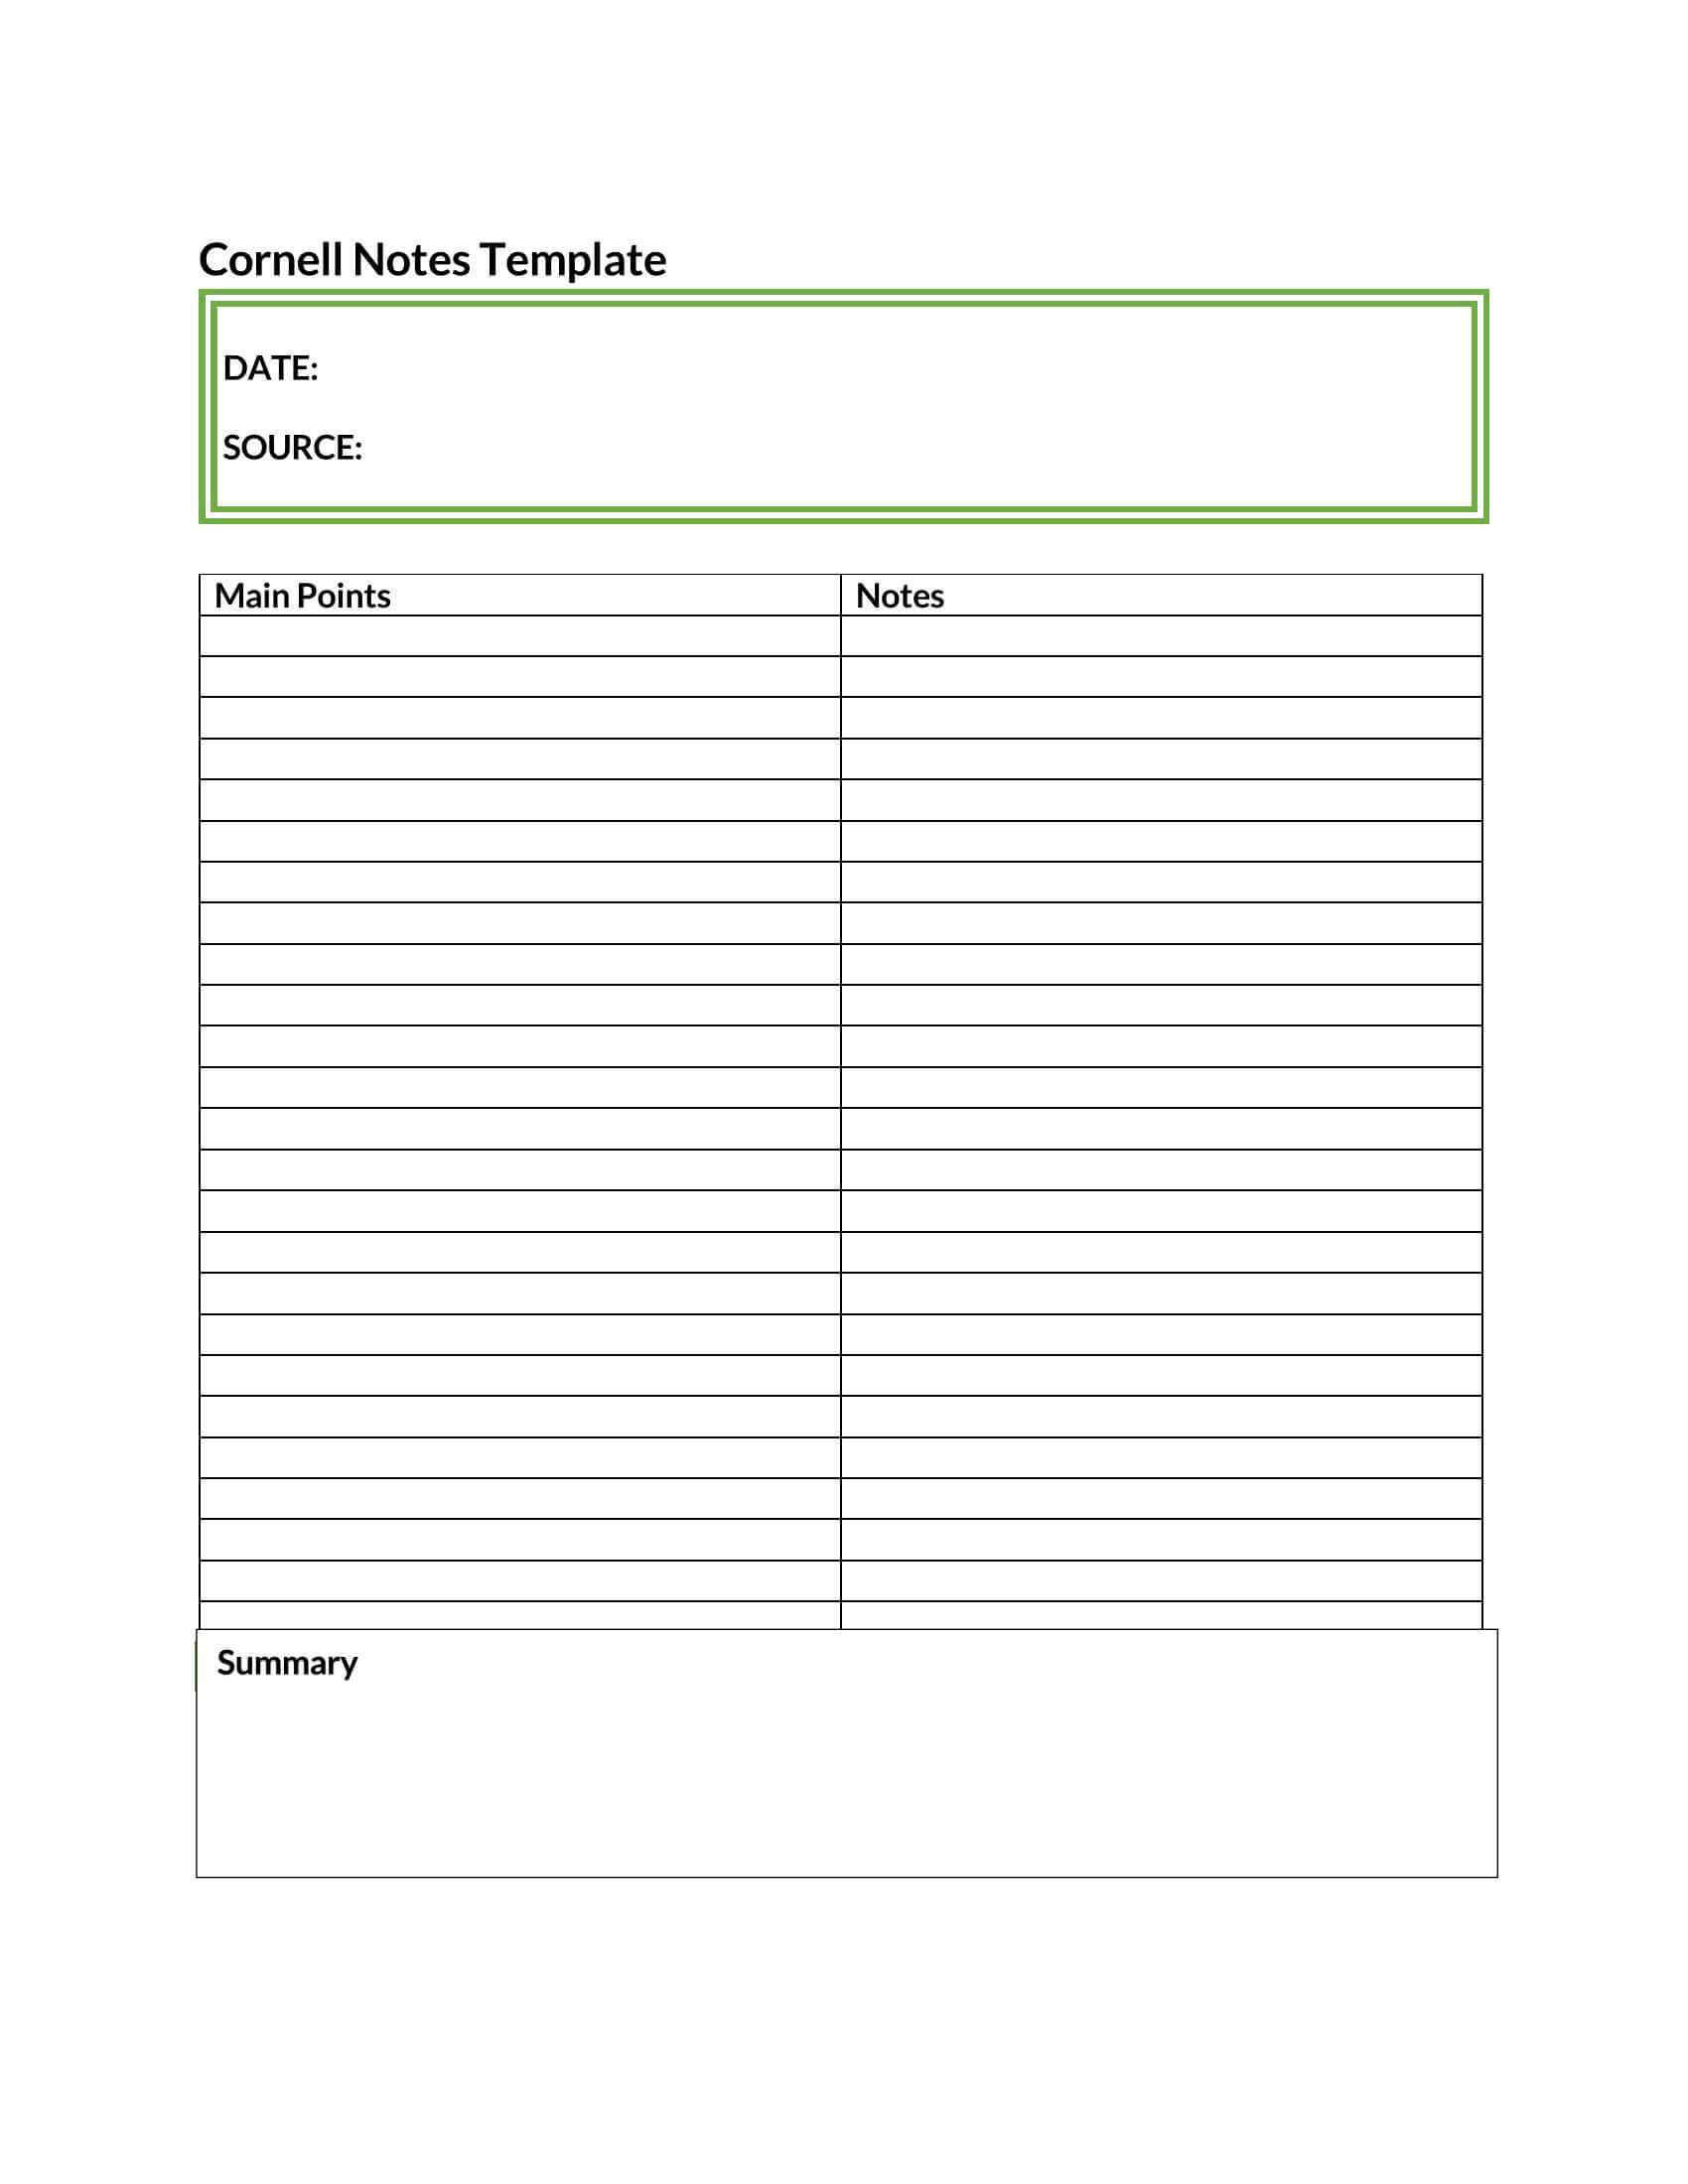 Blank Cornell Note Template Excel